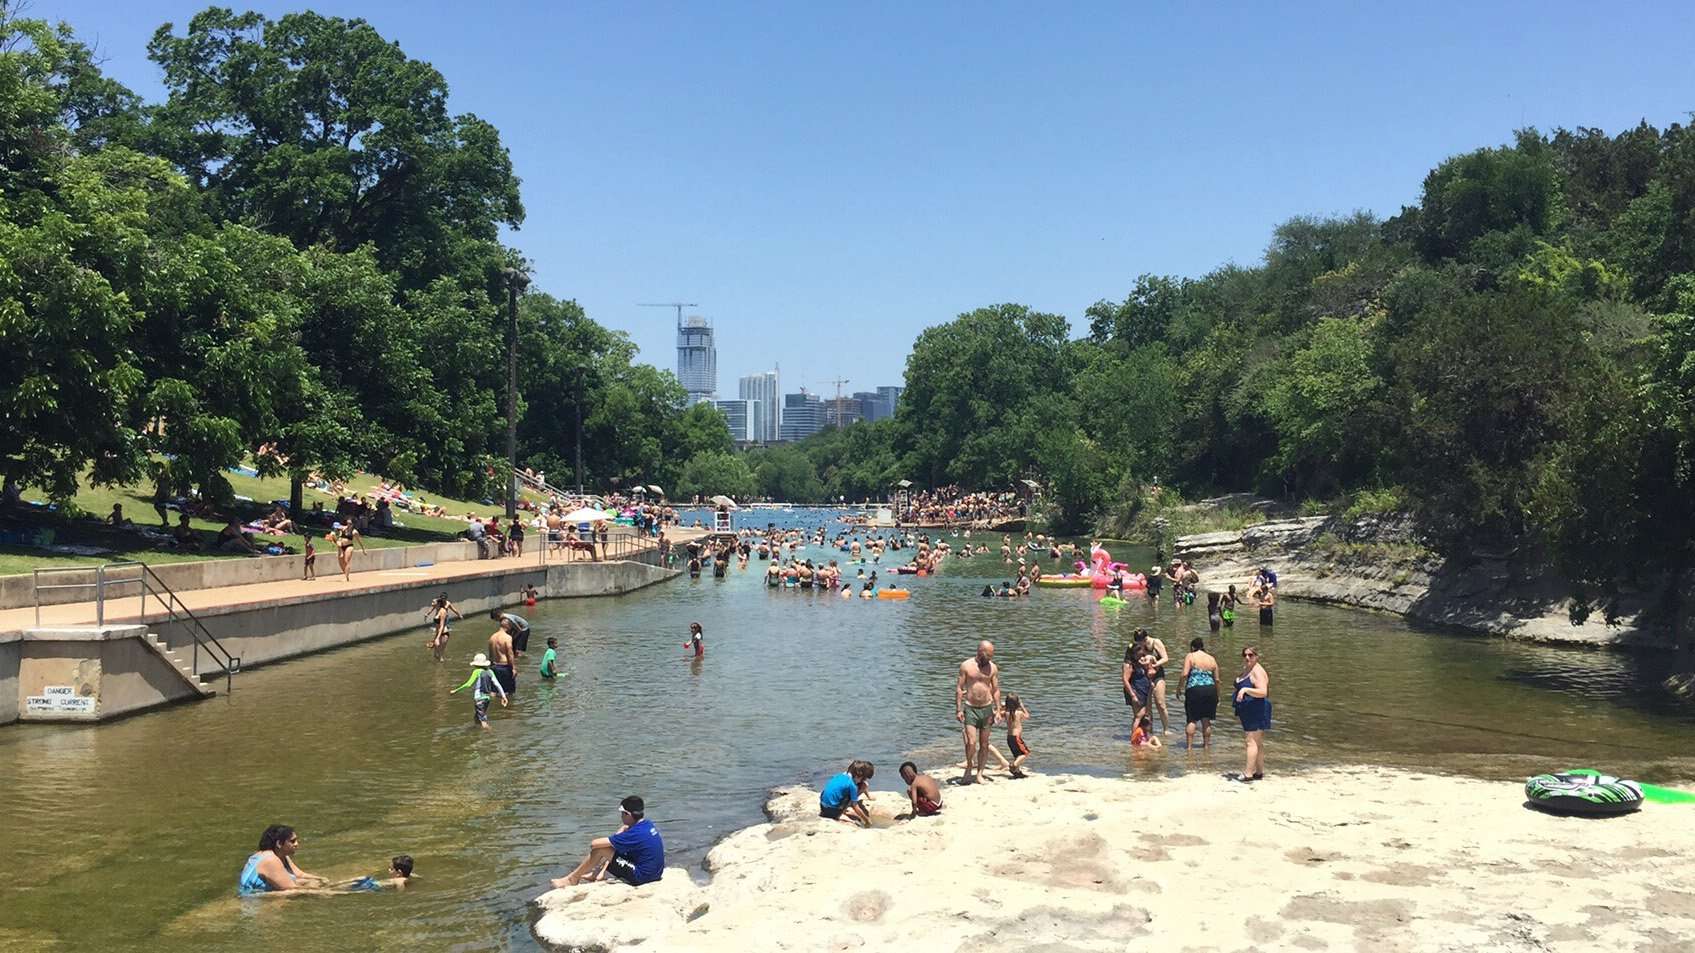 Barton Springs Pool will be open and ready for use soon